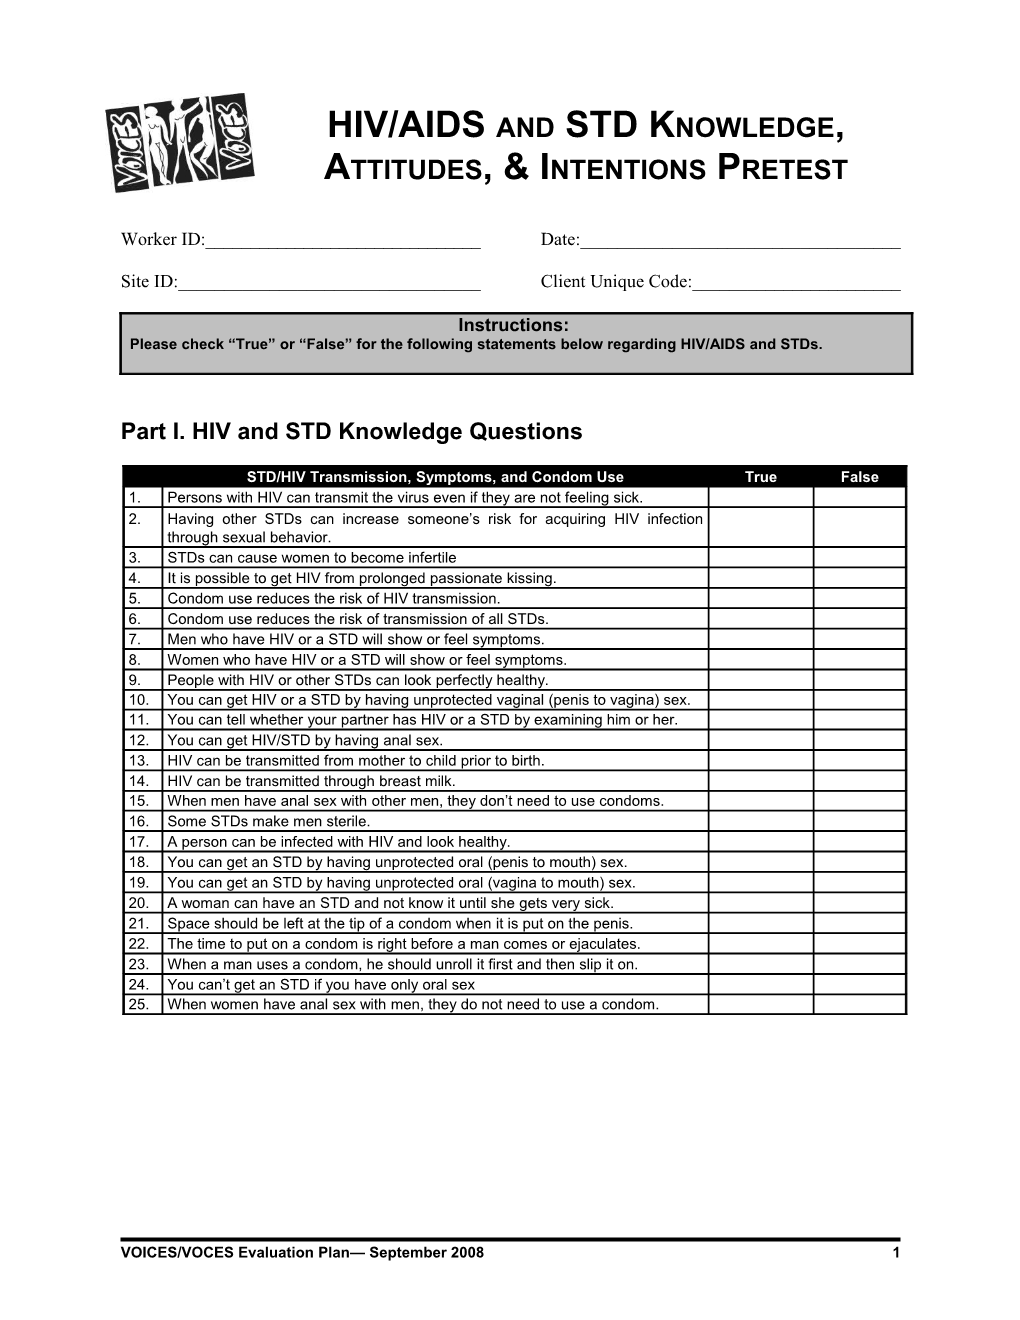 HIV/AIDS and STD Knowledge, Attitudes, & Intentions Pretest